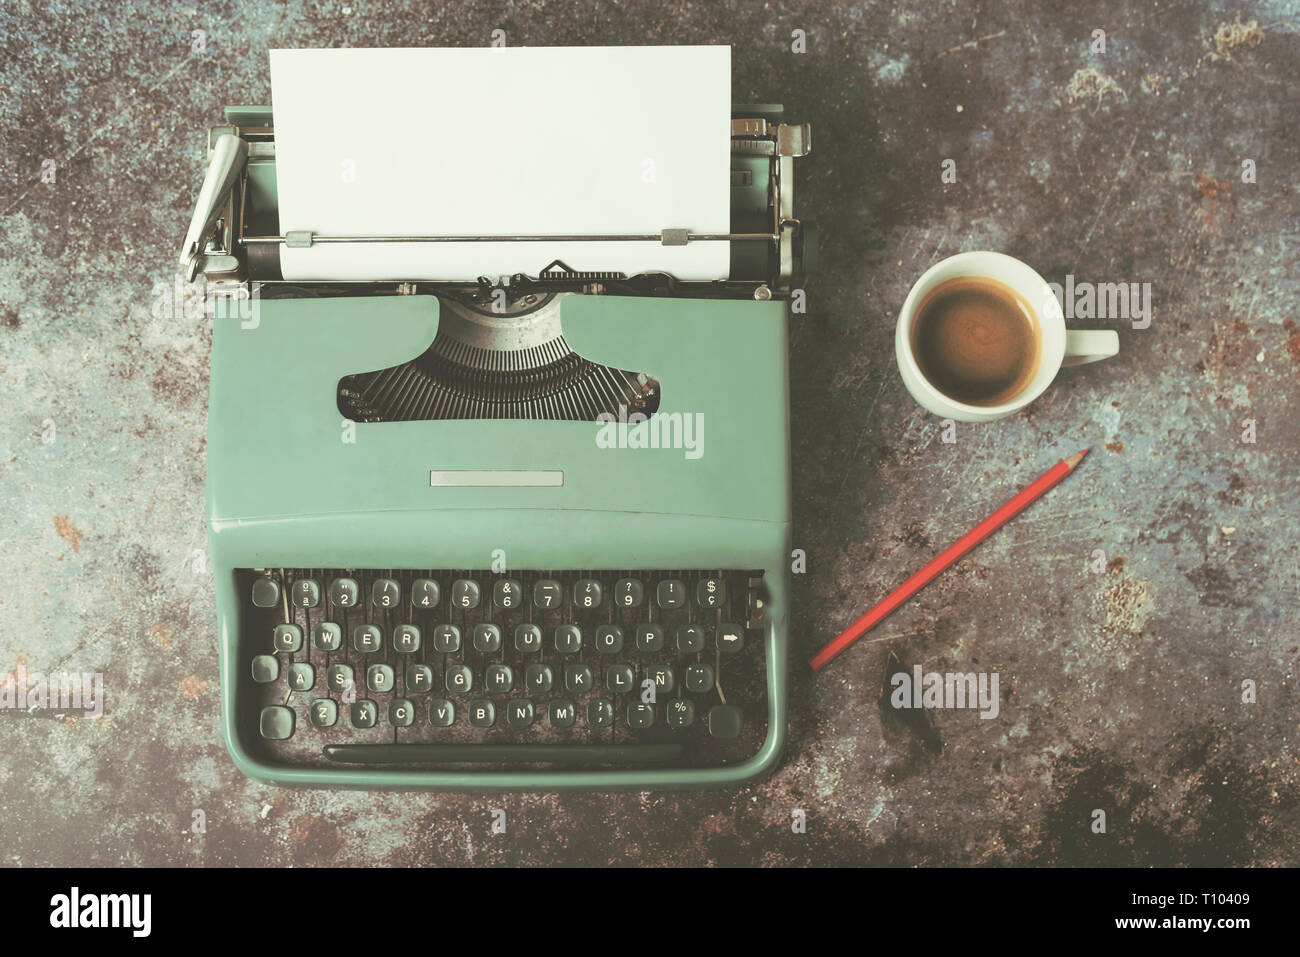 old typewriter next to a cup of coffee against Grunge background Stock Photo